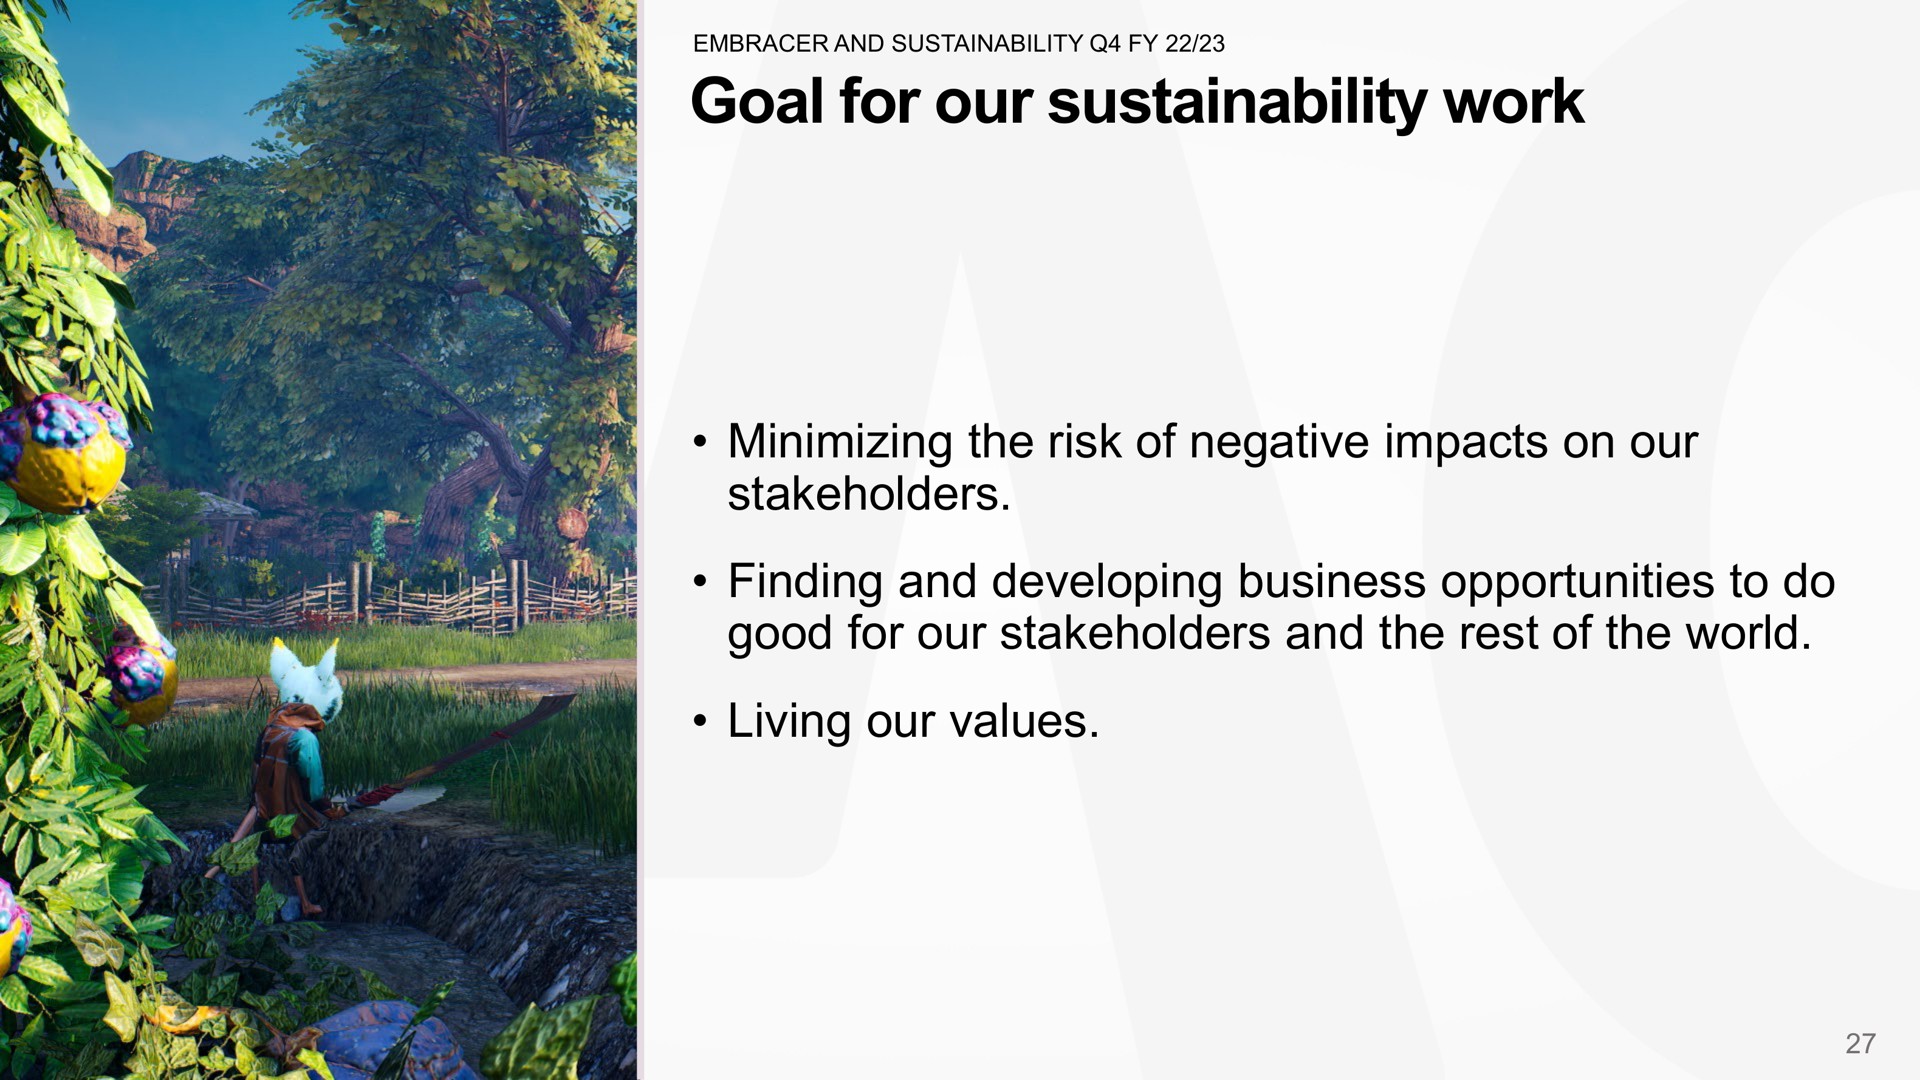 goal for our work minimizing the risk of negative impacts on our stakeholders finding and developing business opportunities to do good for our stakeholders and the rest of the world living our values | Embracer Group